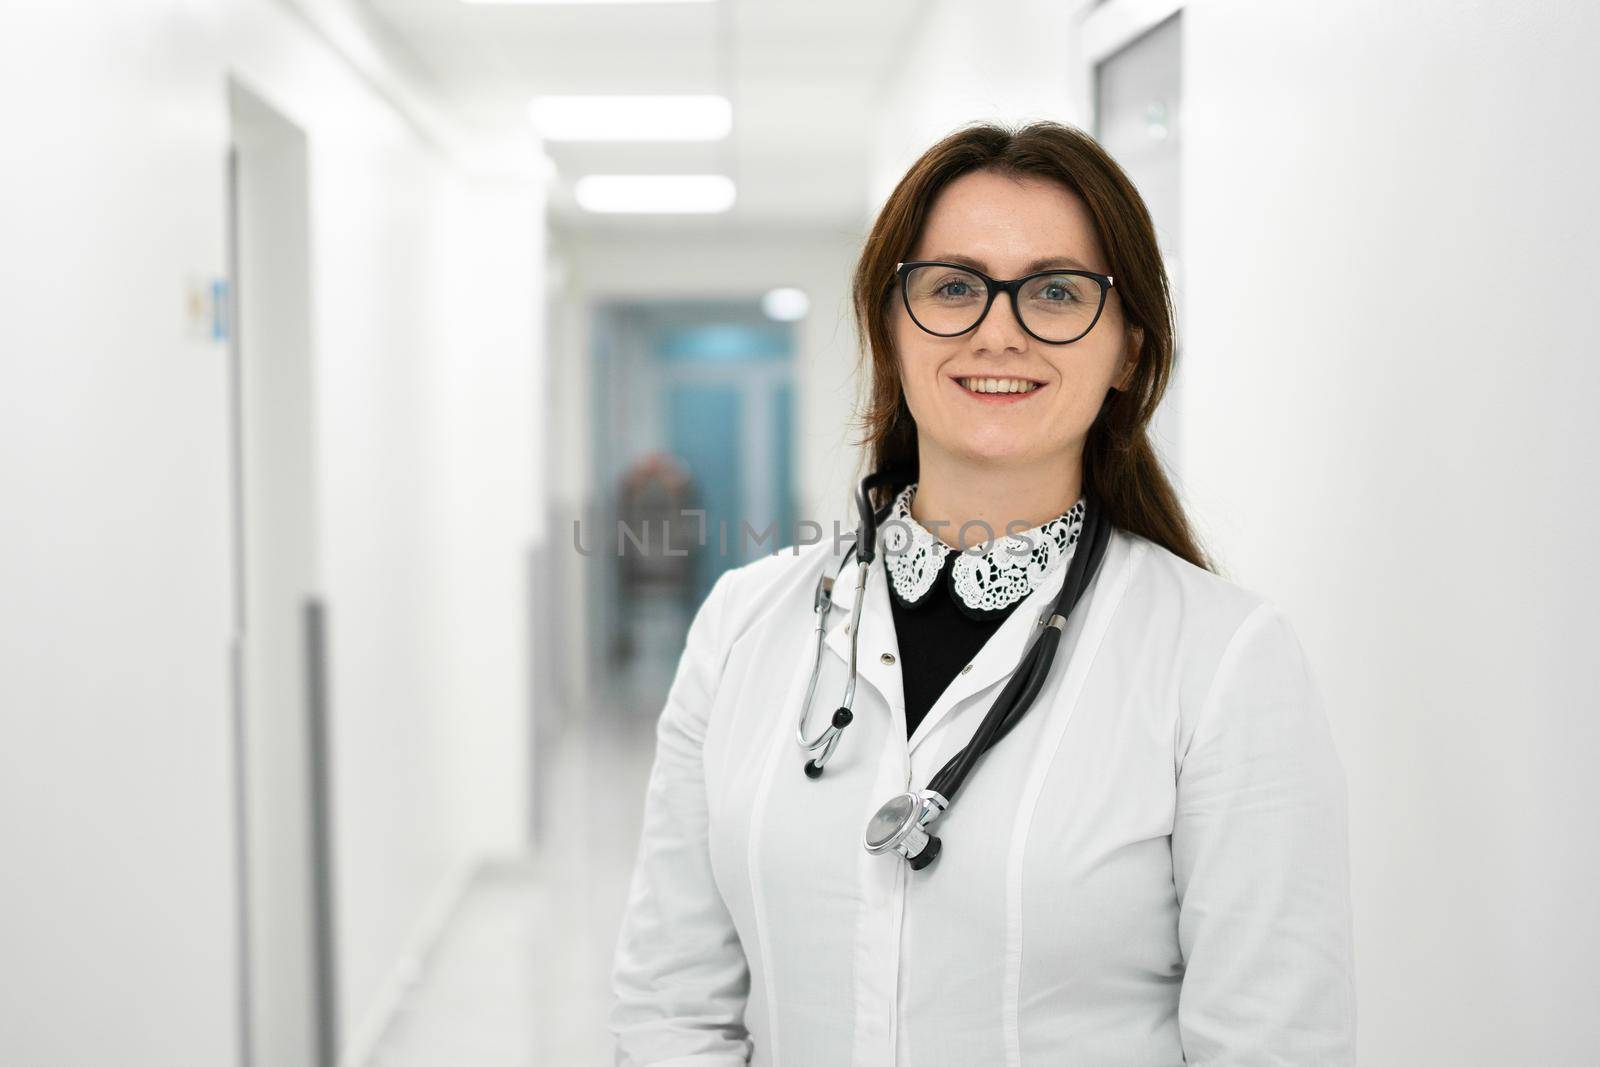 Headshot portrait of smiling millennial female doctor wearing medical uniform and stethoscope looking at camera in the corridor of a modern hospital. Healthcare concept, medical insurance by Tomashevska